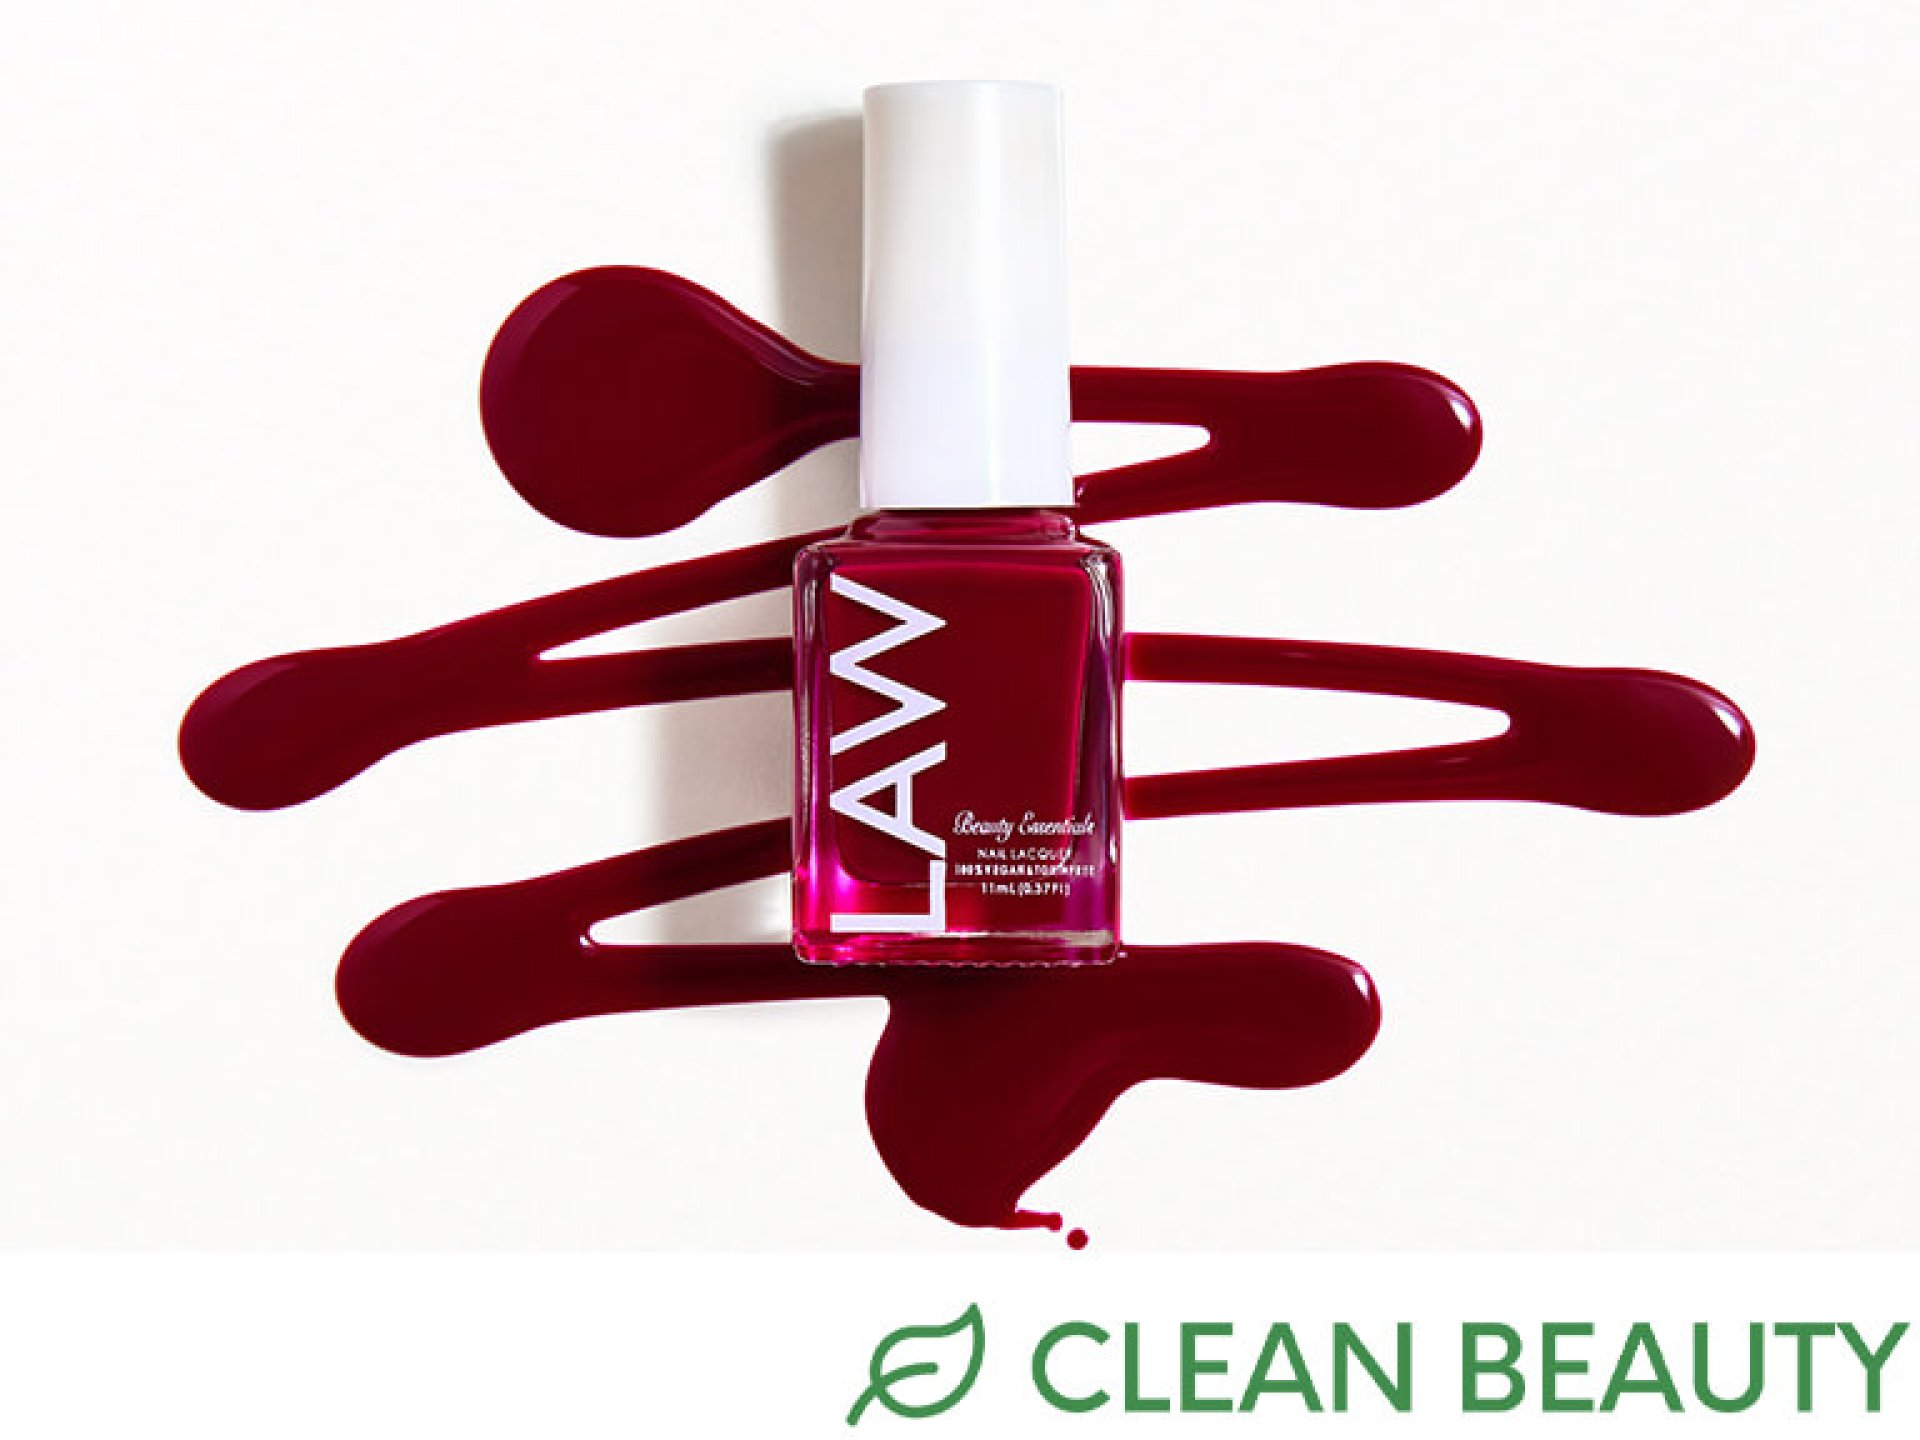 LAW BEAUTY ESSENTIALS Nail Polish in 2PM Wine_Clean